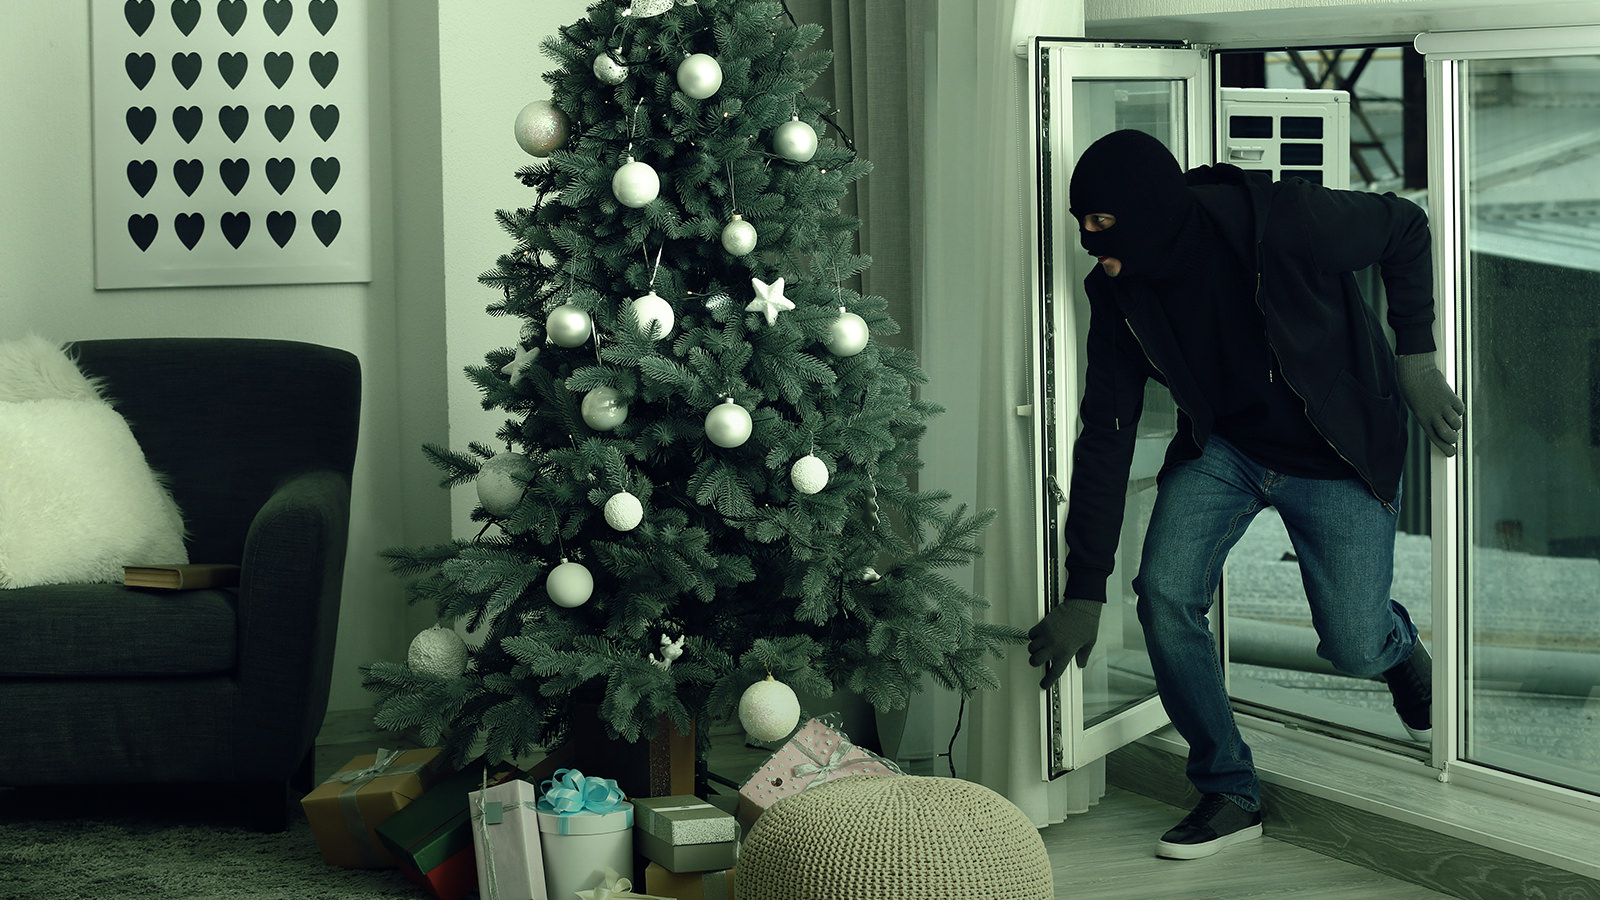 Featured image for “Securing Your Home For The Holidays”